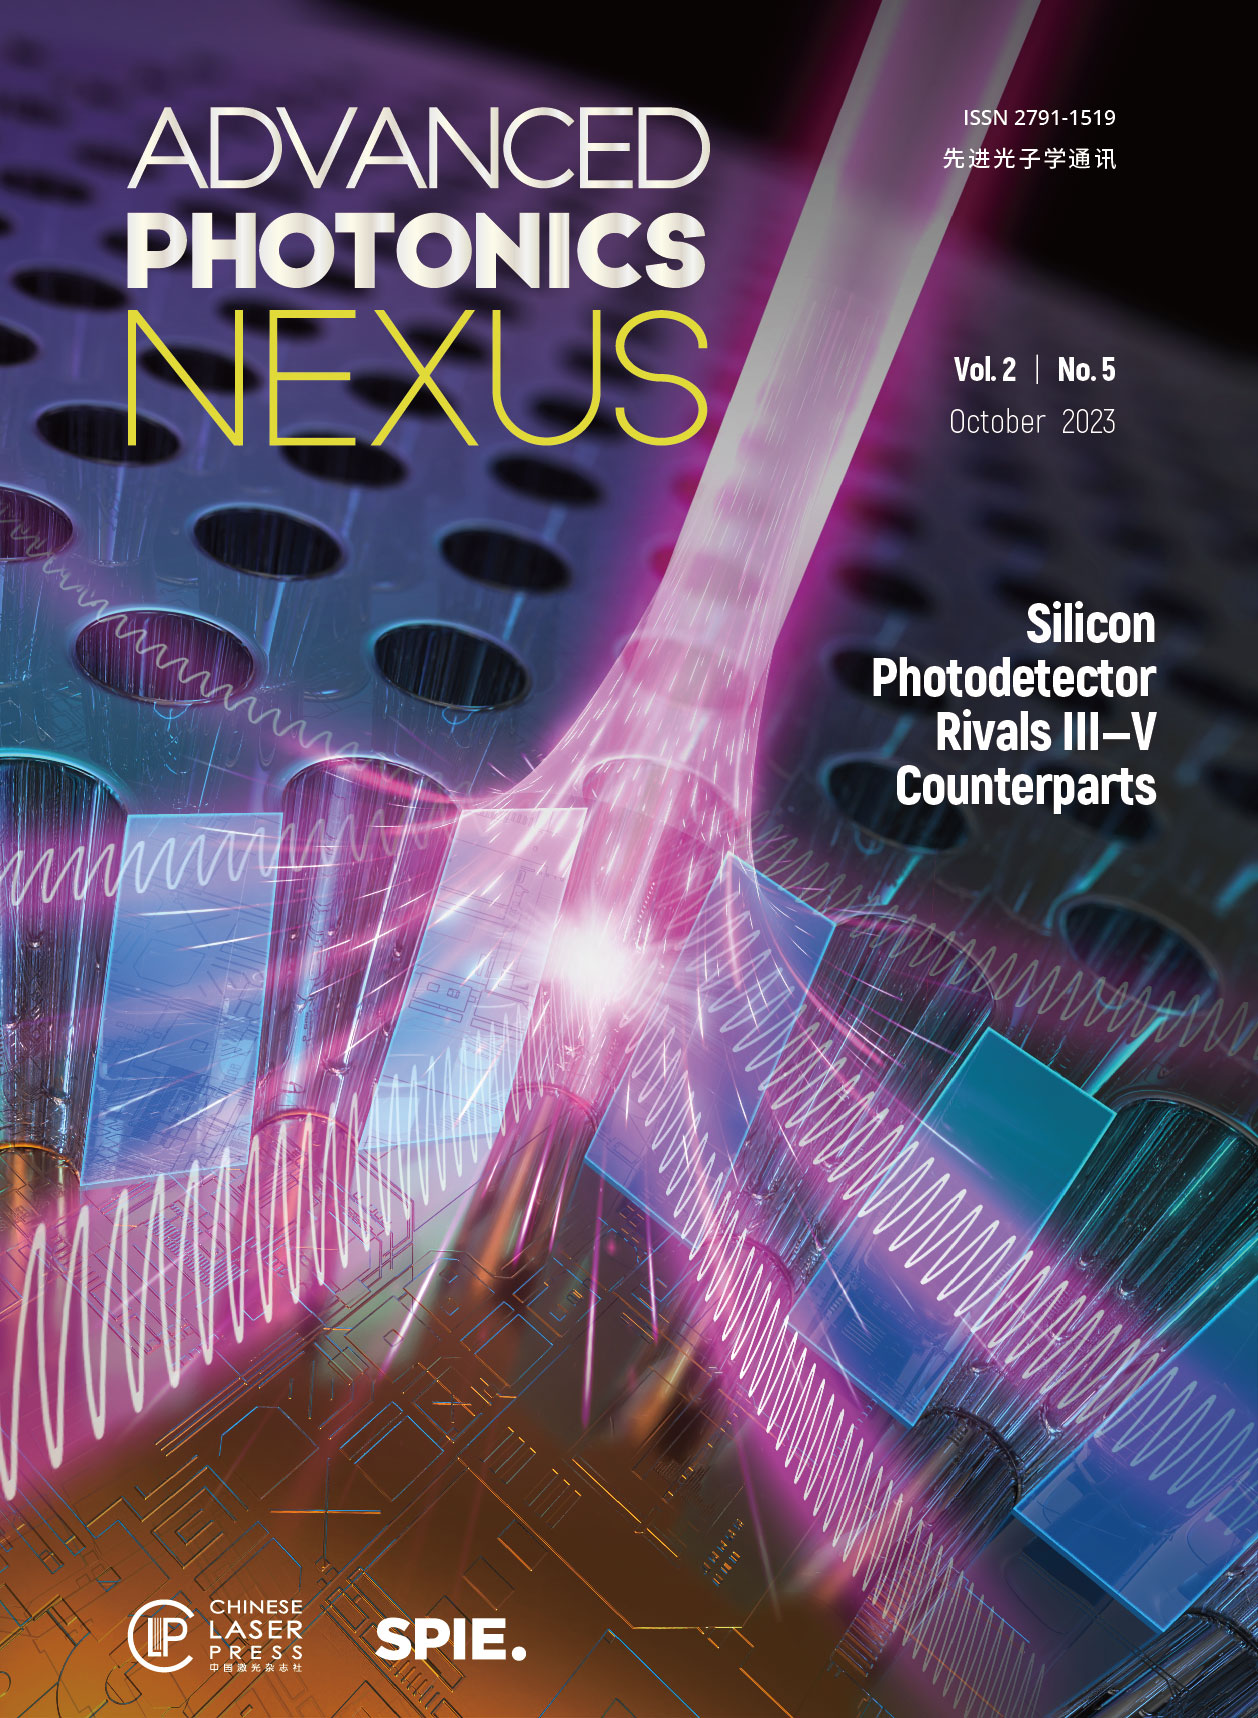 About the cover: Advanced Photonics Nexus Volume 2, Issue 5